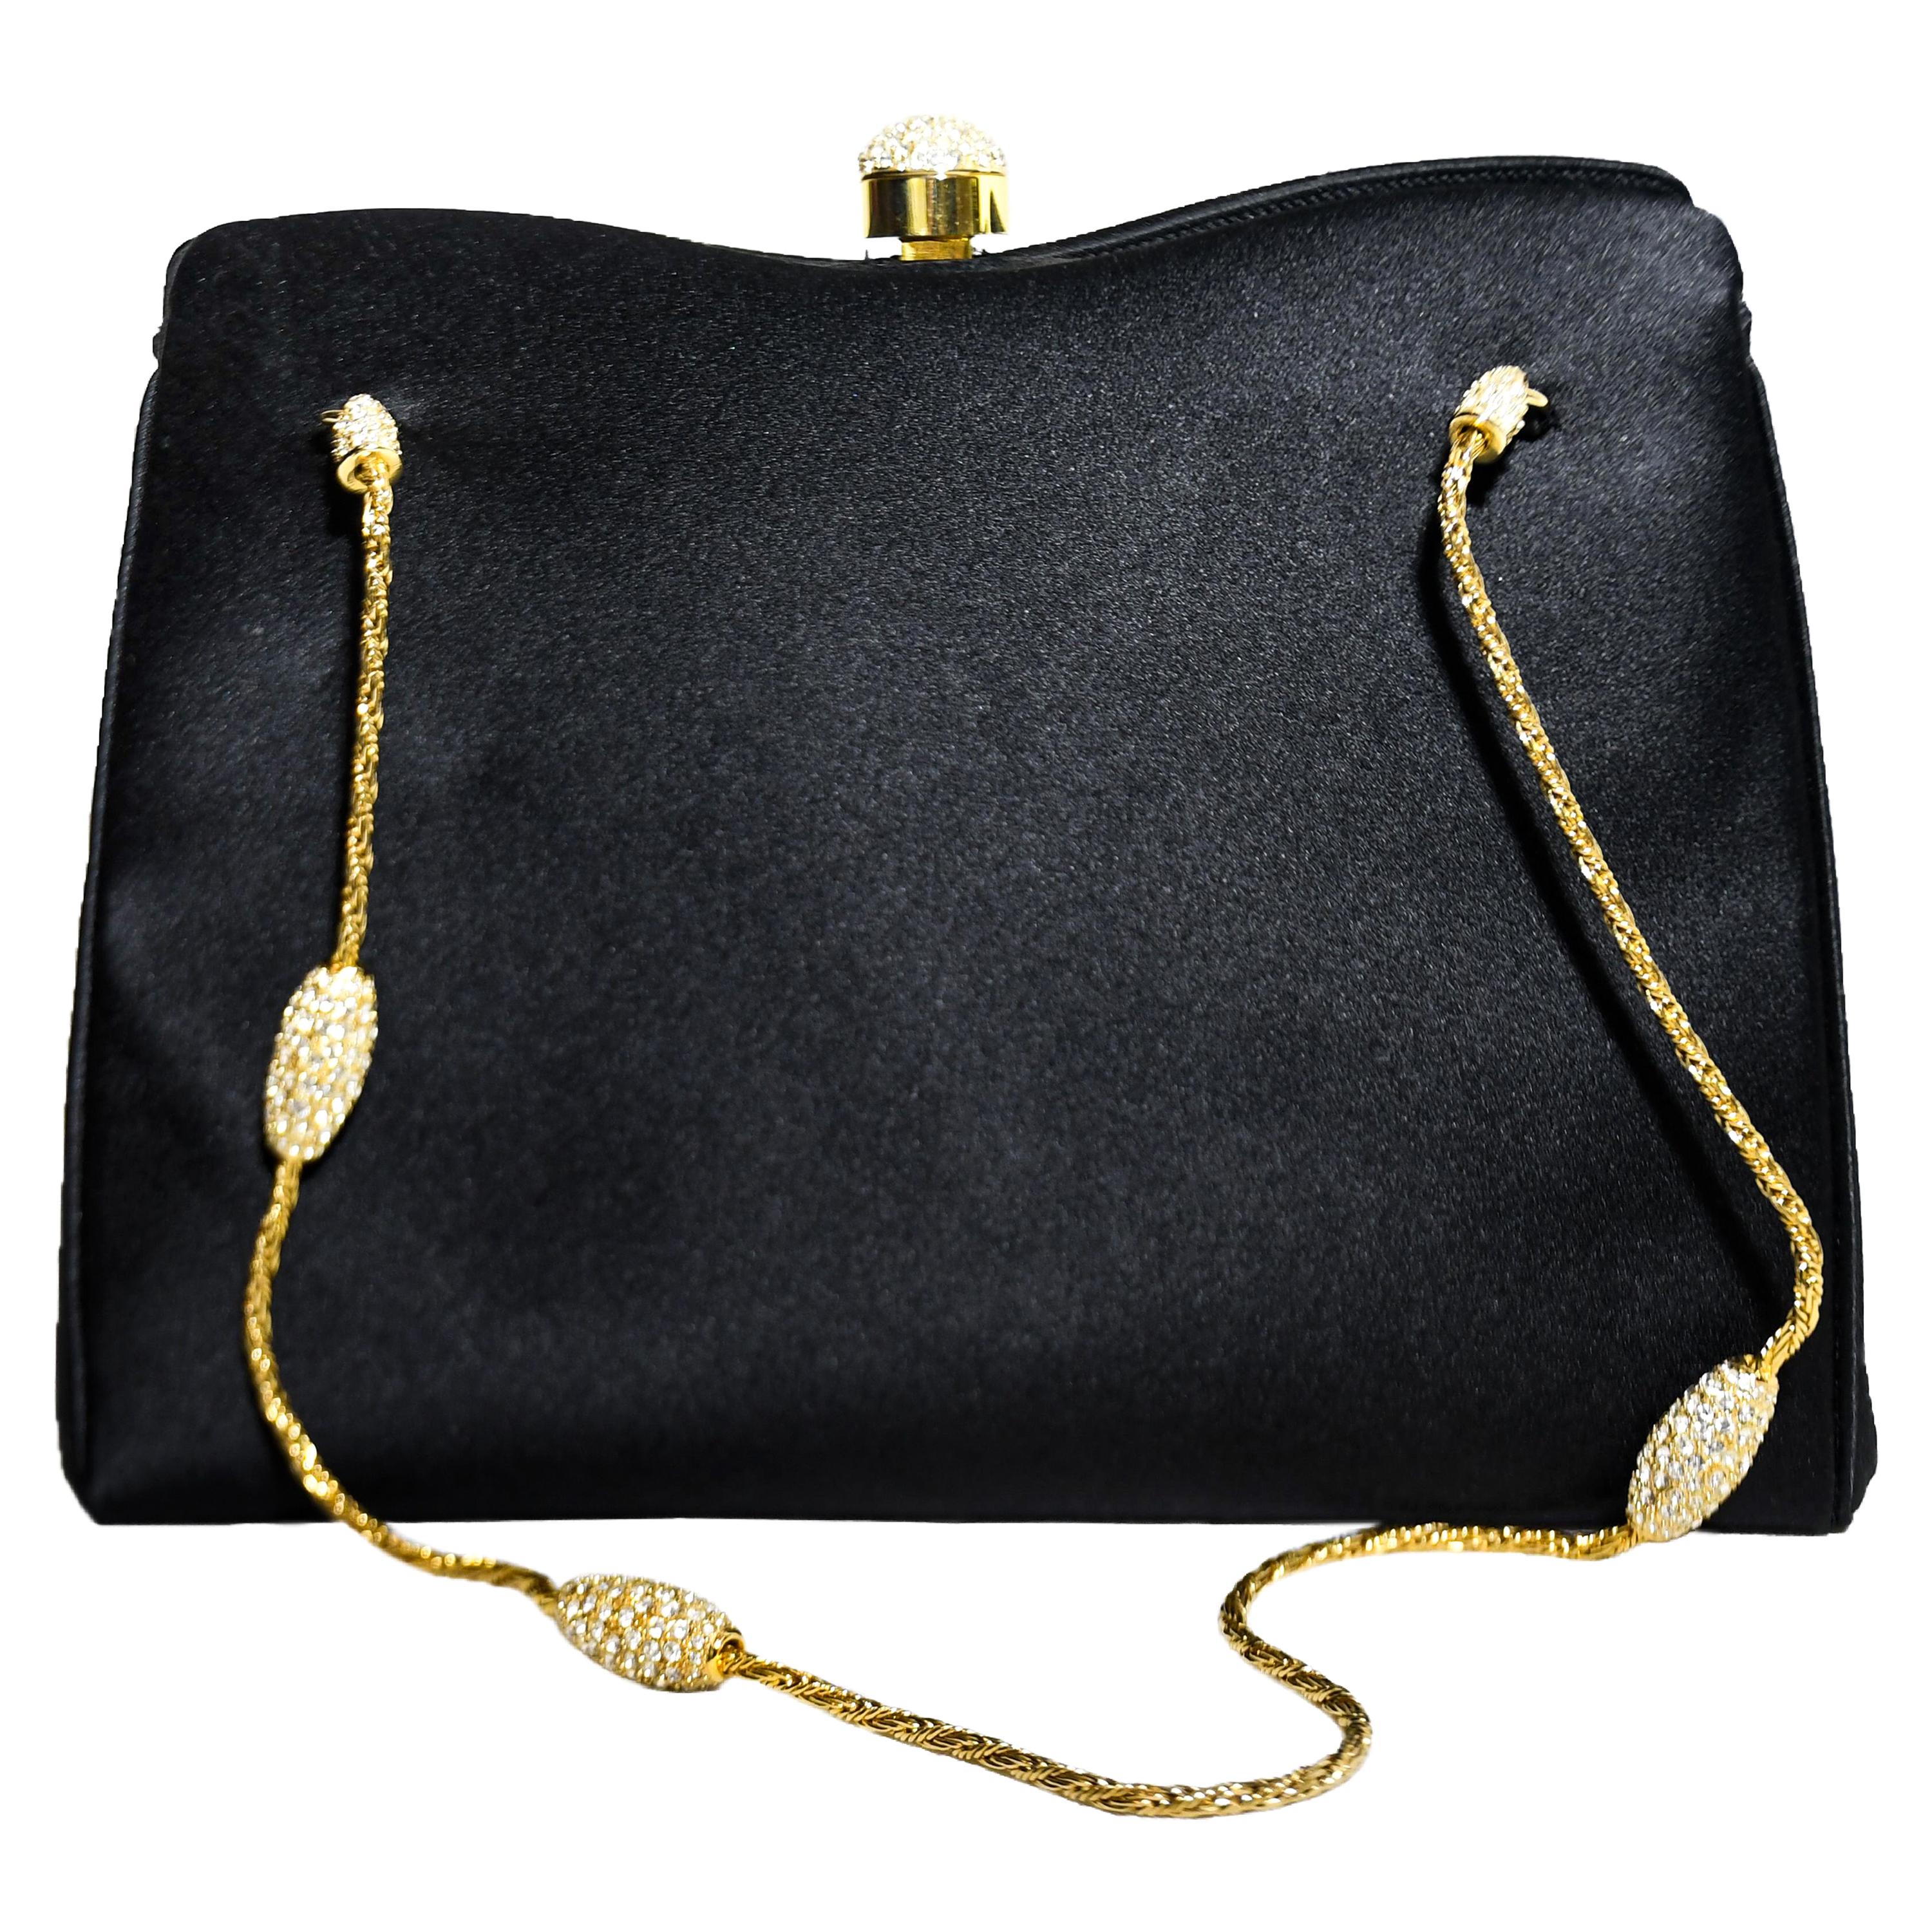 Judith Leiber Black Satin Bag With Gold Tone & Crystal Top Handle For Sale